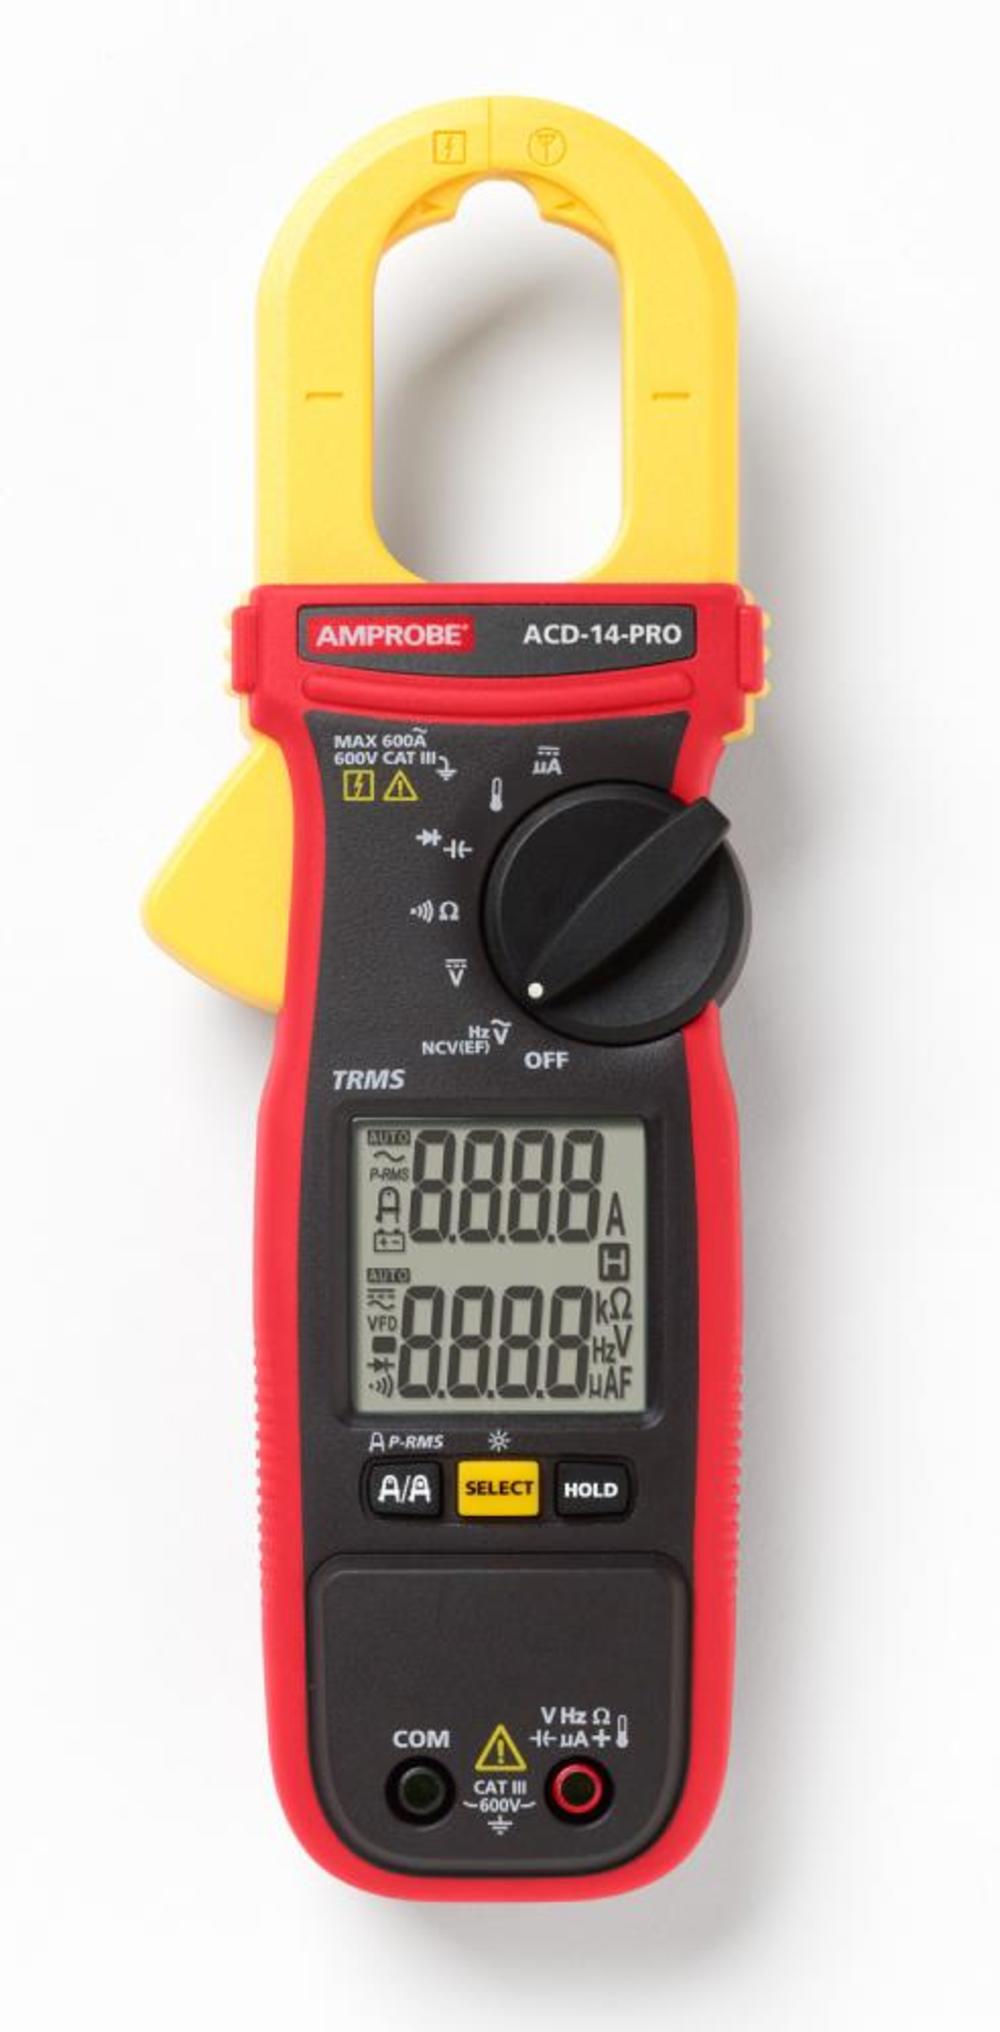 Amprobe Dual Display 600 A TRMS Clamp Meter -  ACD-14-PRO